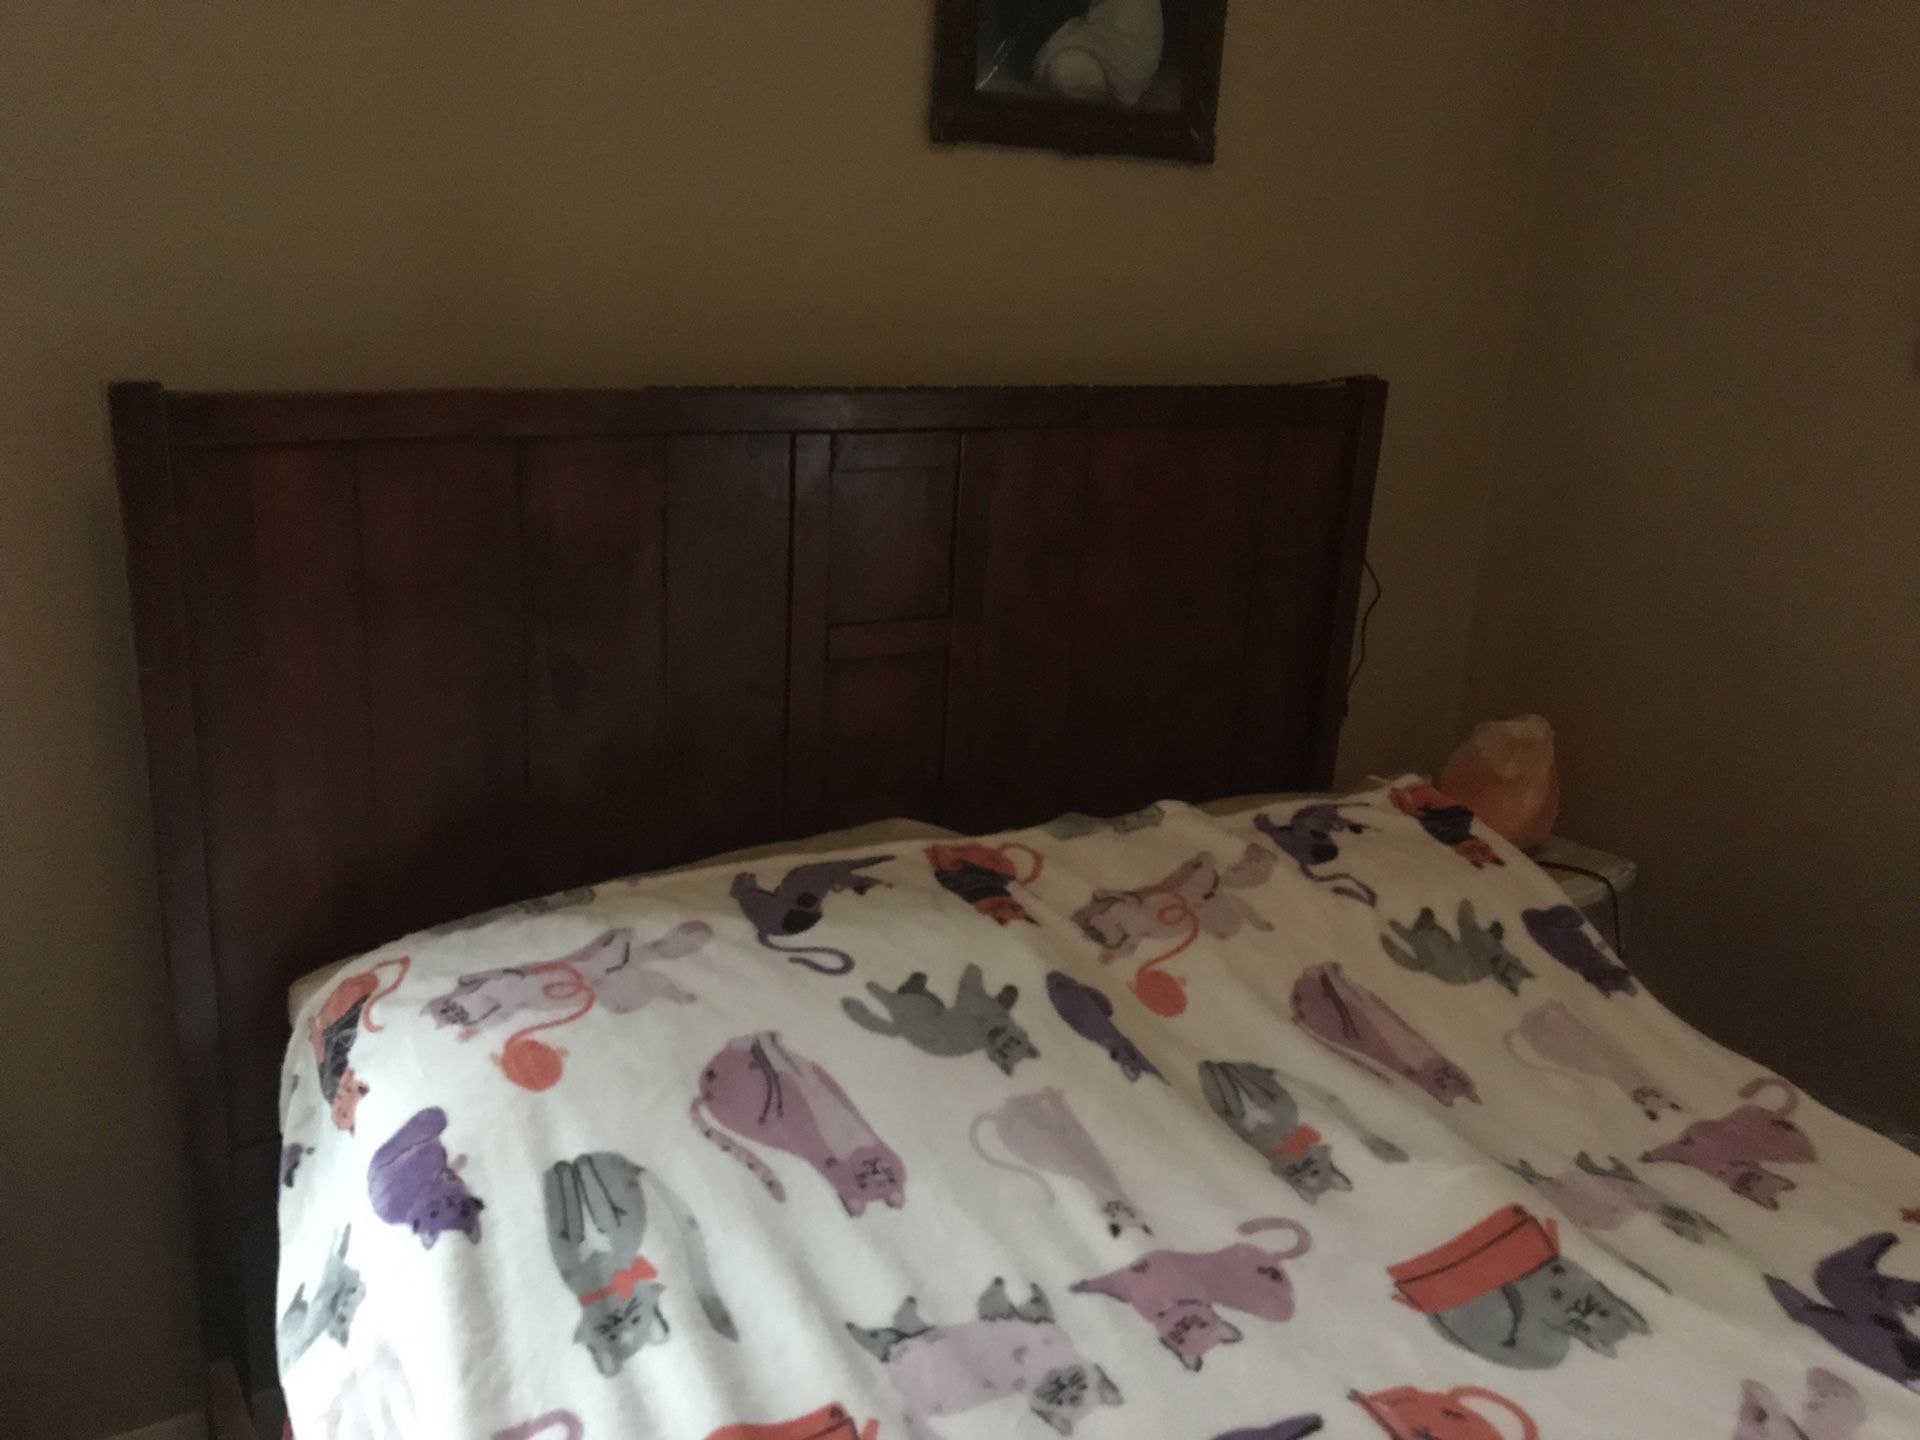 Full size bed mattress and frame